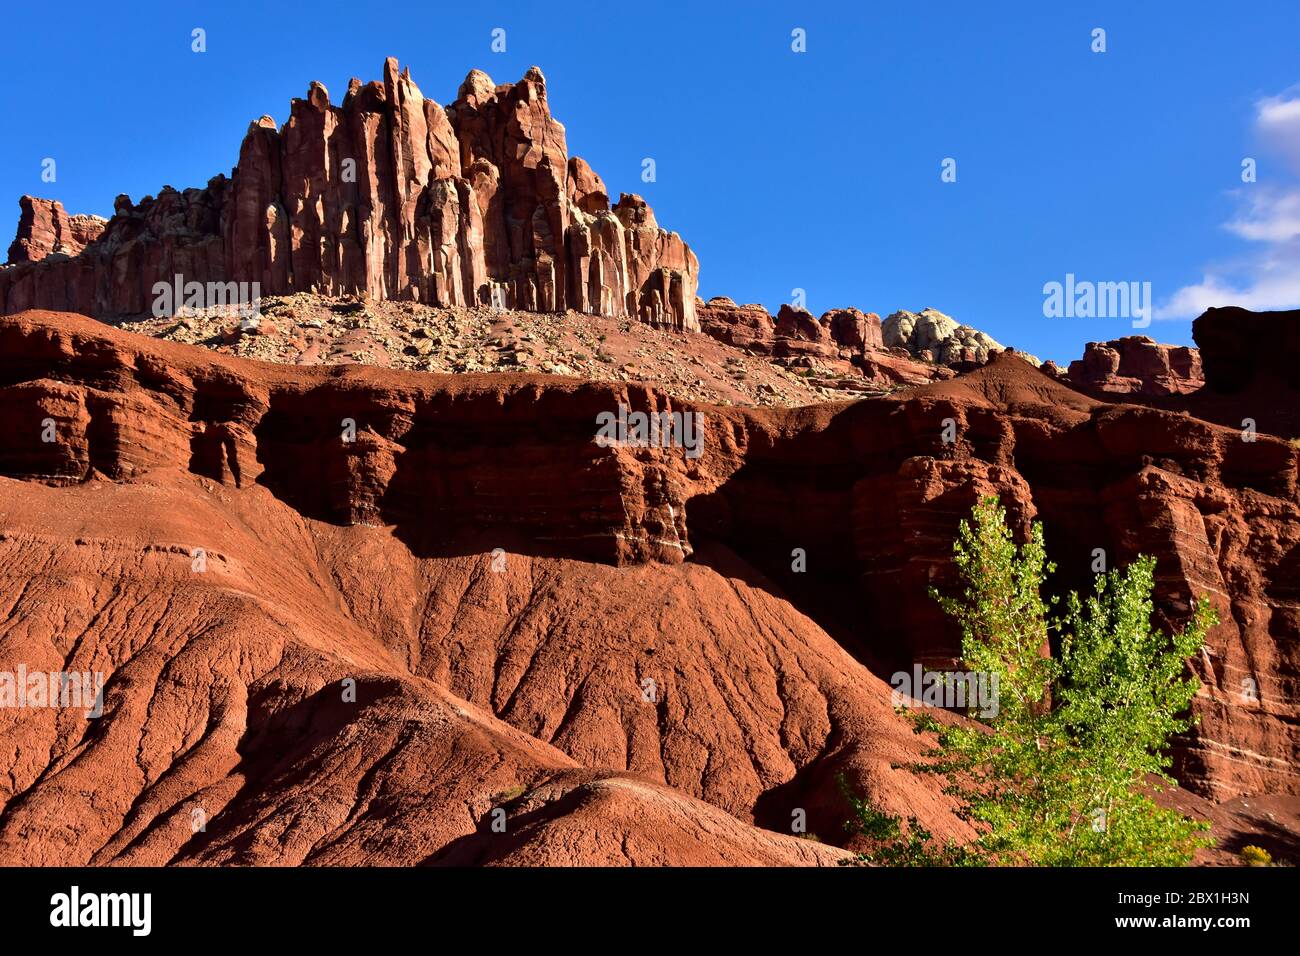 The red rocks prominent at Capital Reef National Park in Utah is called Entrada Sandstone. Stock Photo